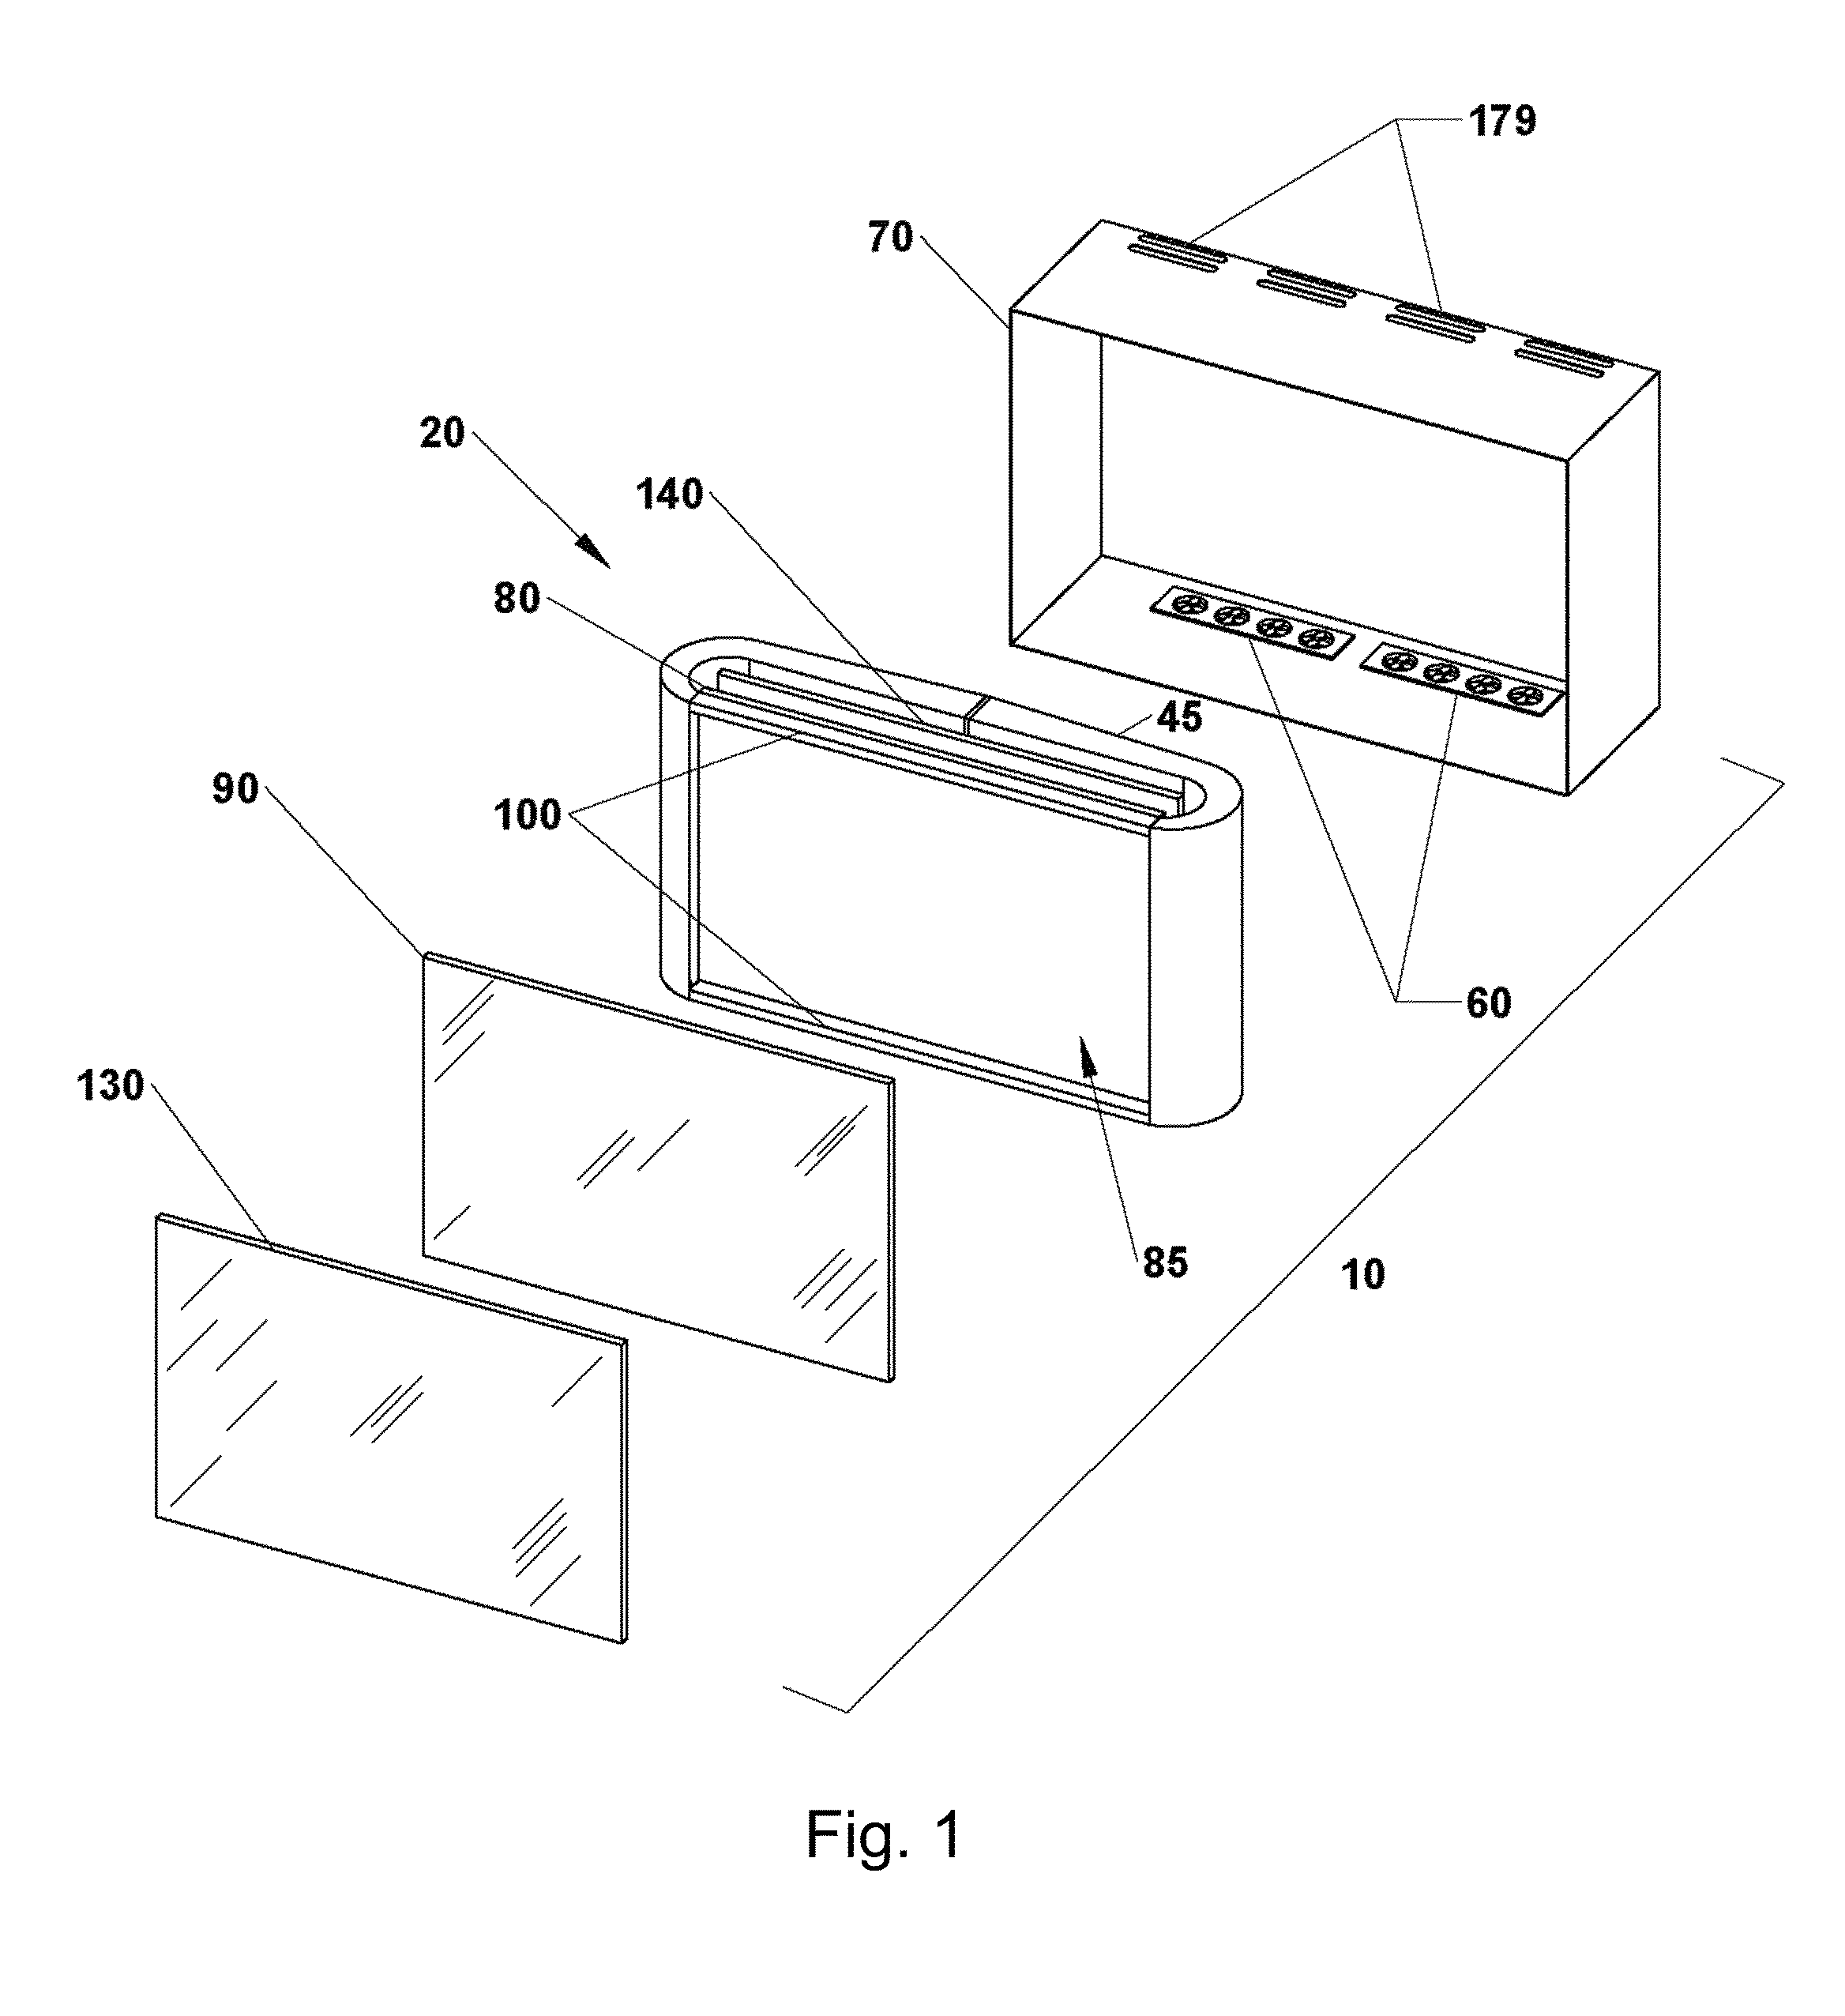 System for using constricted convection with closed loop plenum as the convection plate